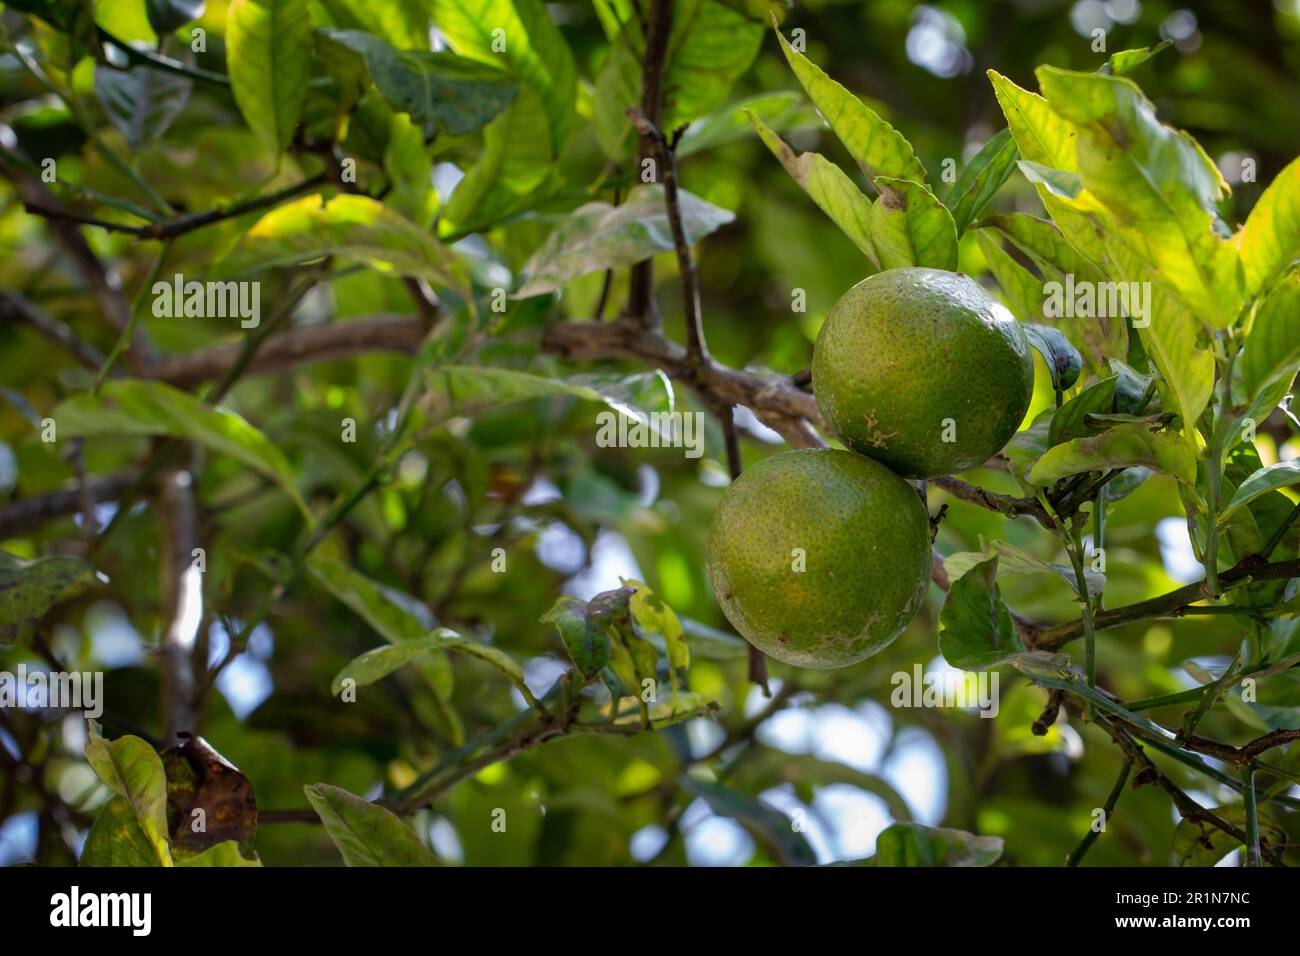 Sweet lime fruit(also known as Citrus limetta, musambi) in a tree. Food rich in vitamin c and boost immunity. Stock Photo